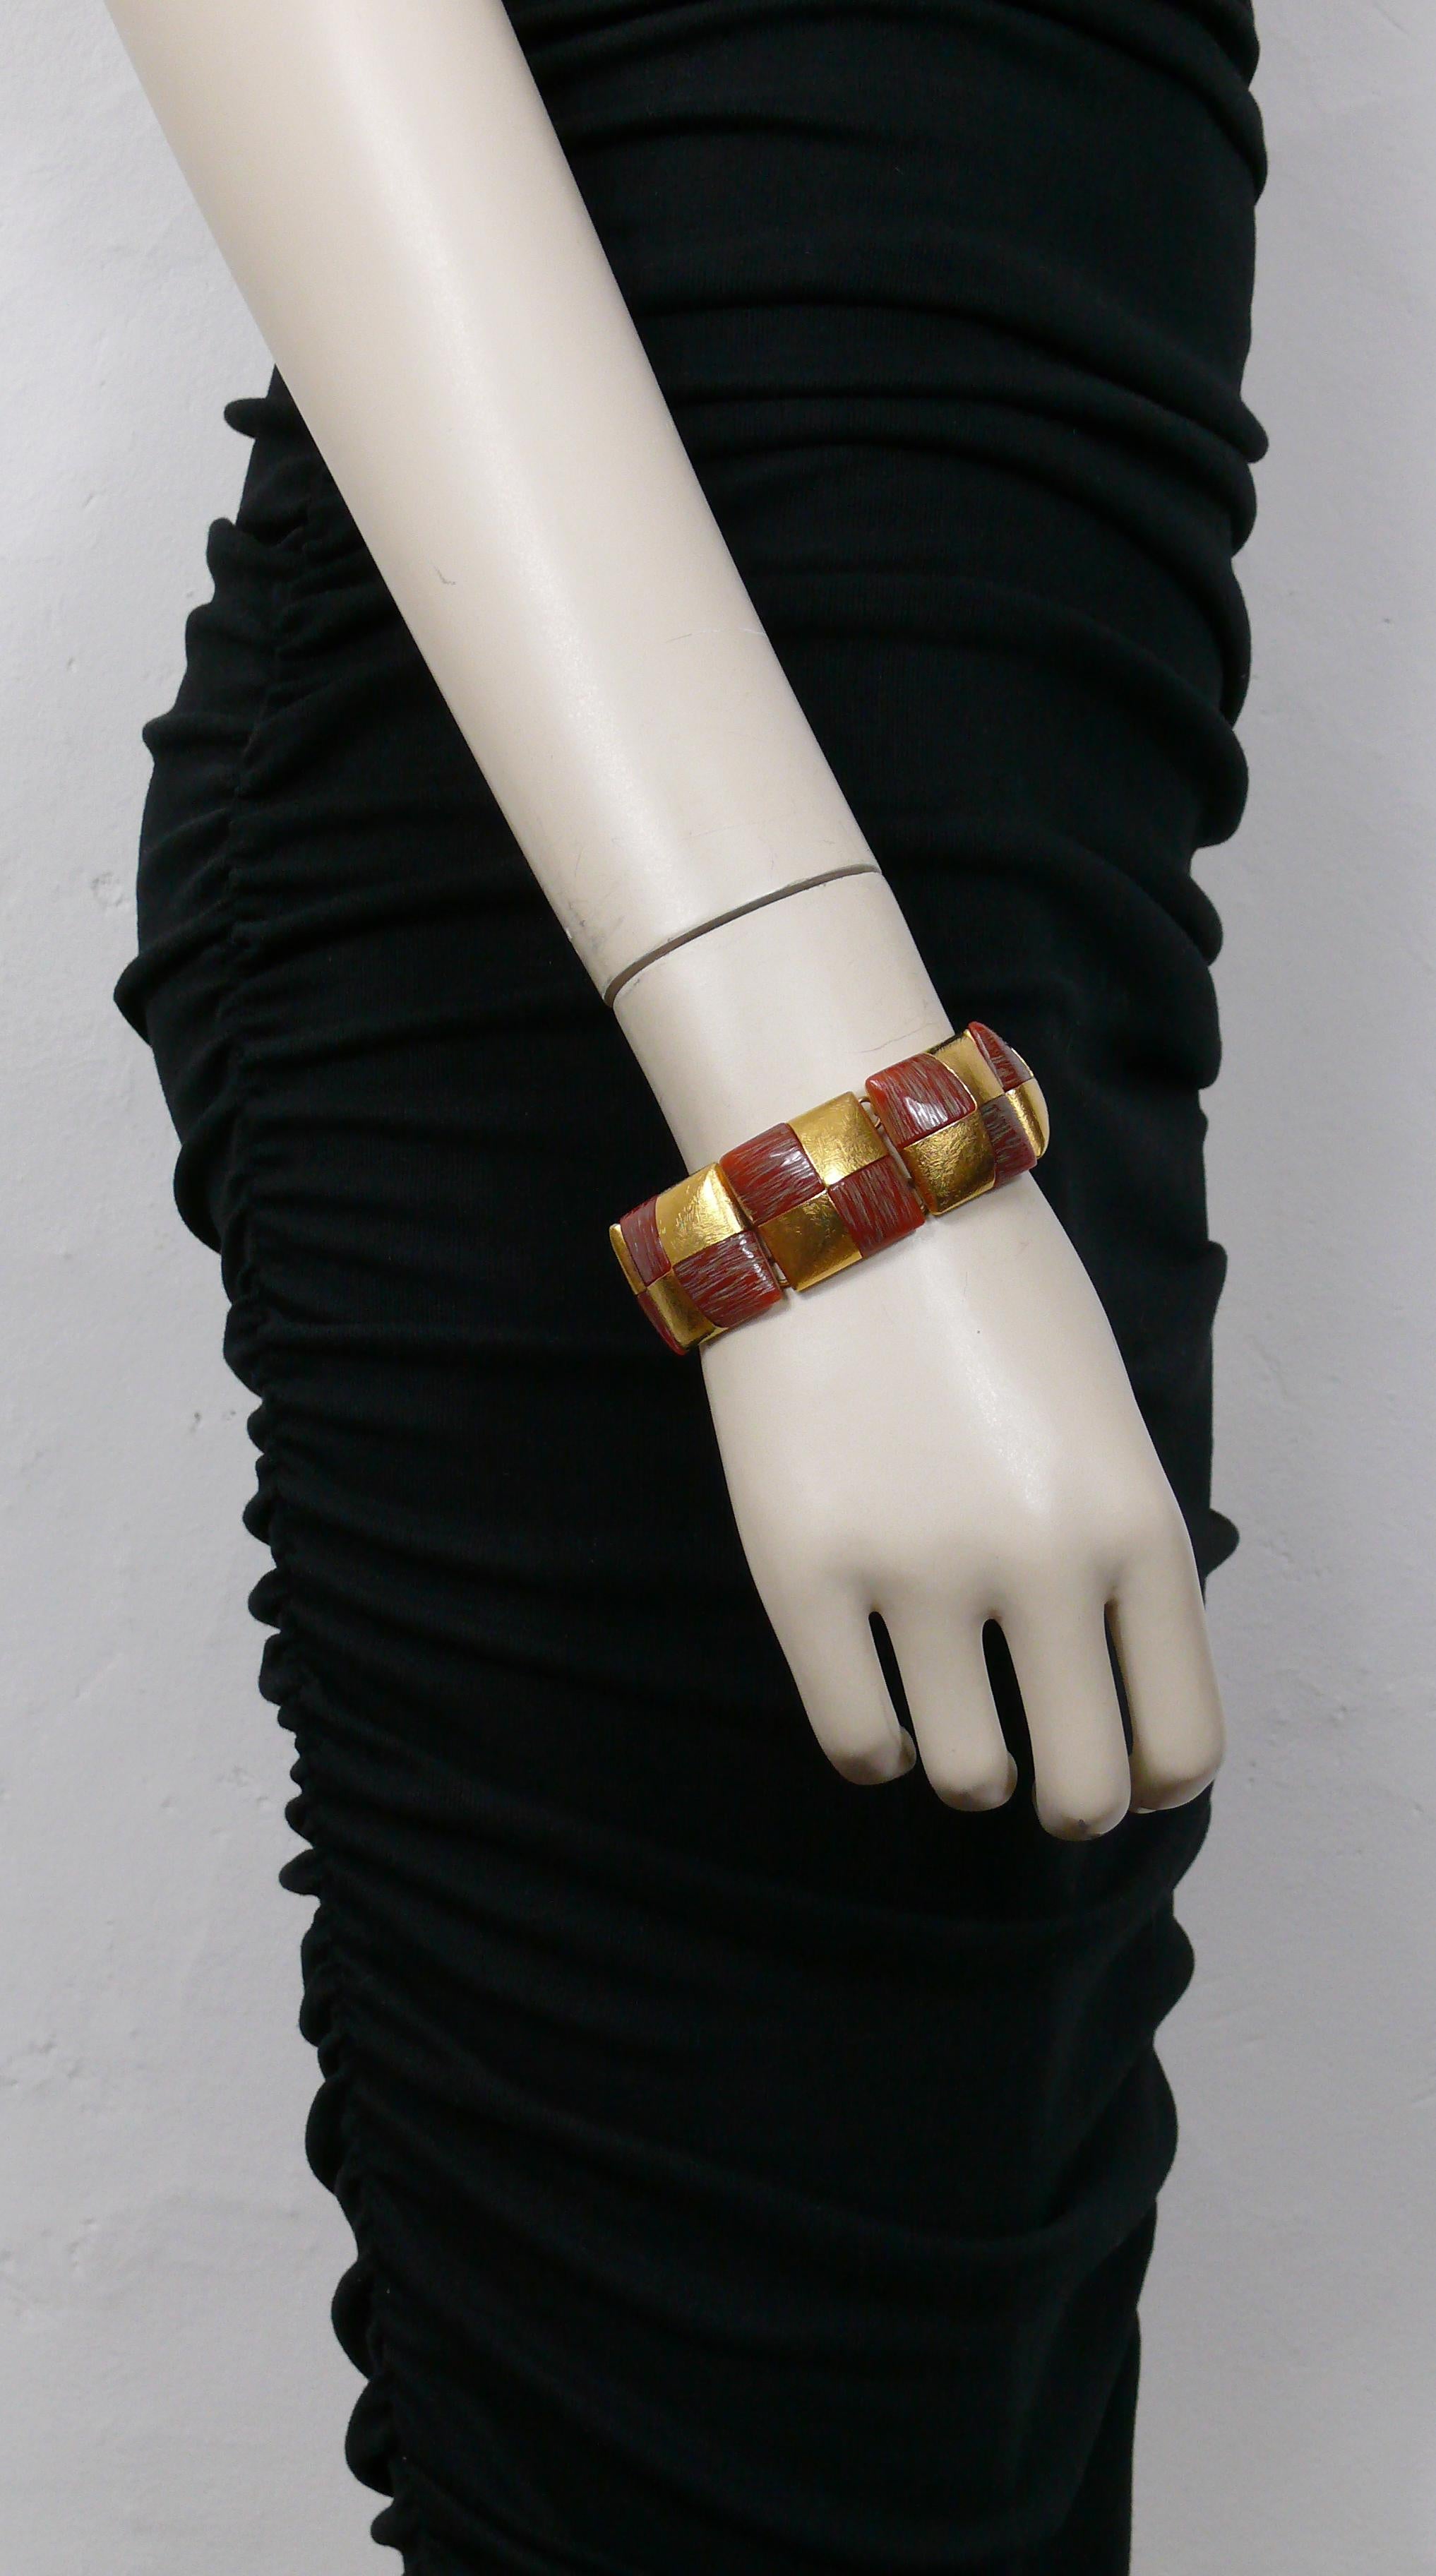 YVES SAINT LAURENT vintage articulated bracelet featuring textured gold tone and resin square links.

Embossed YSL Made in France.

Indicative measurements : inner circumference approx. 17.91 cm (7.05 inches) / width approx. 2.4 cm (0.94